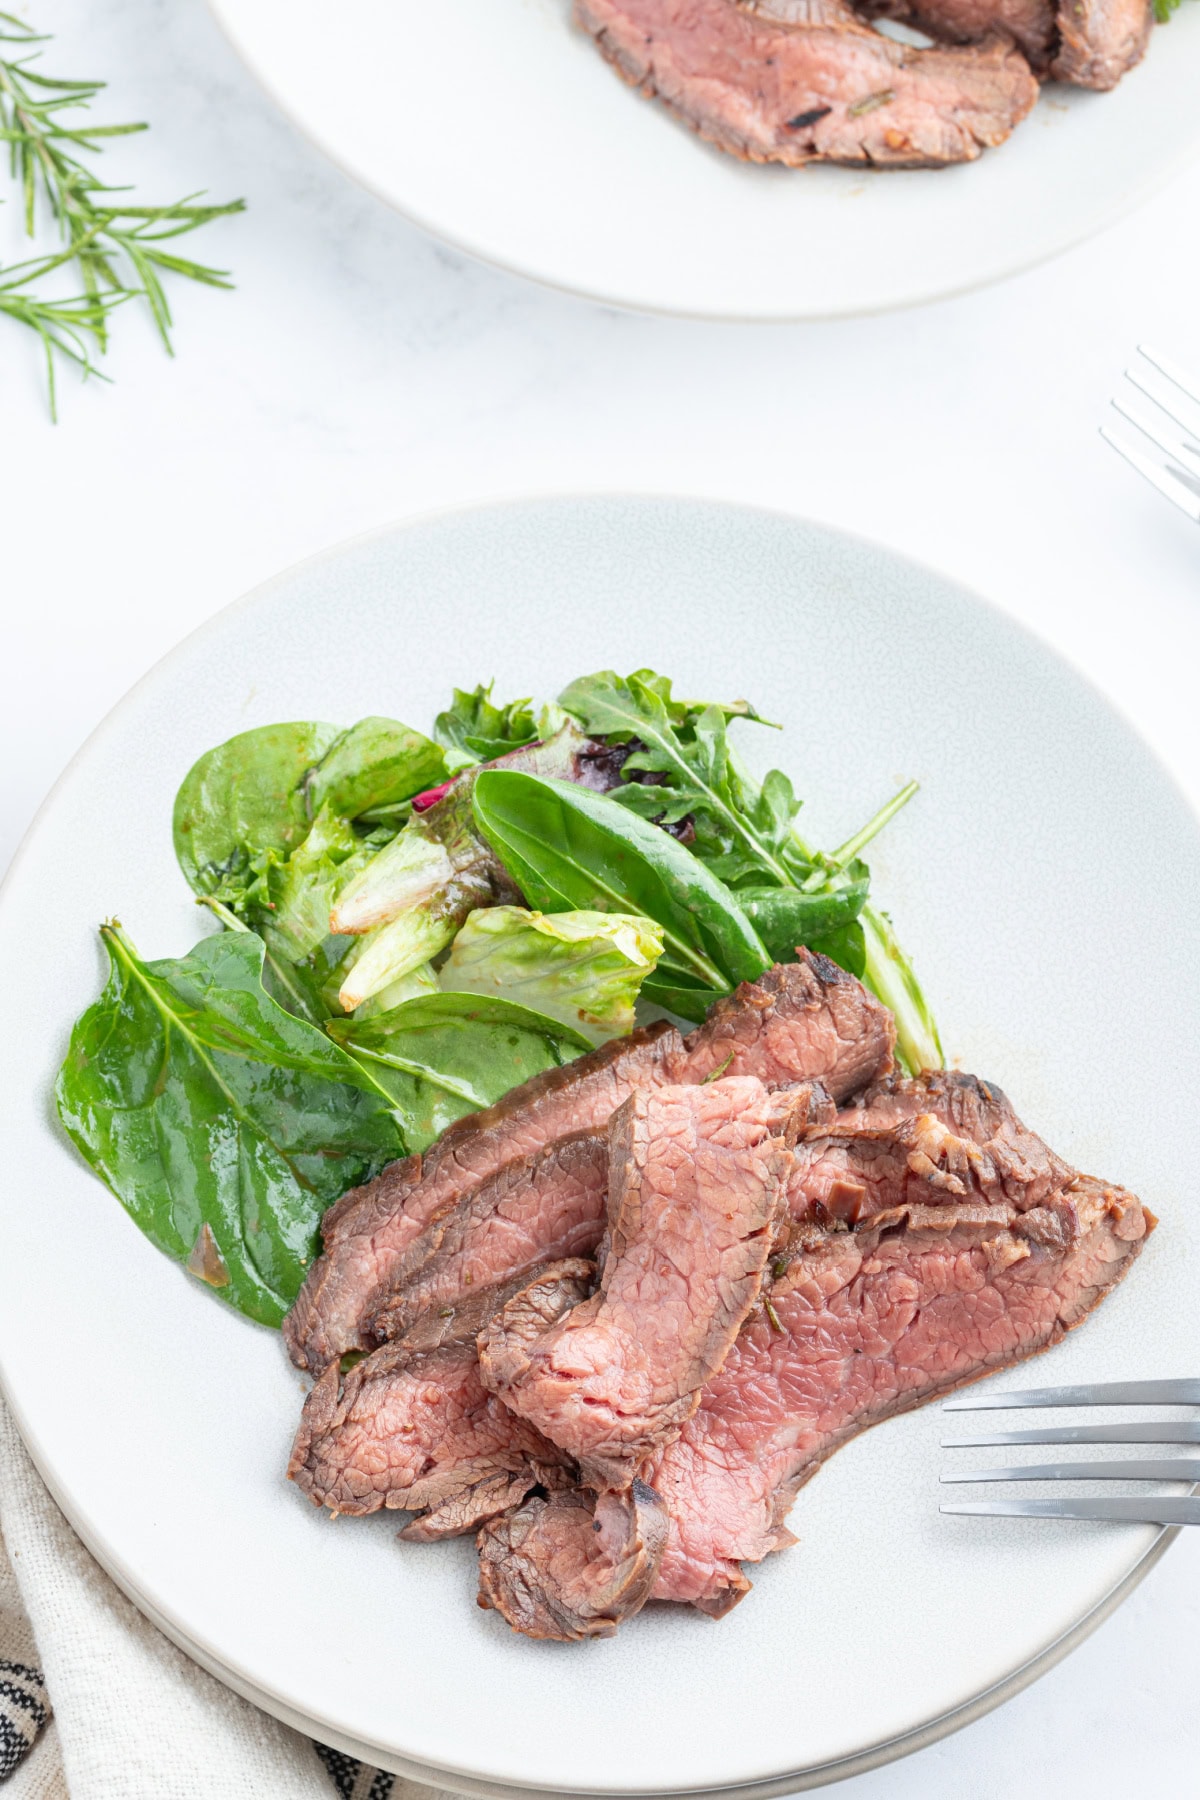 slices of grilled flank steak with rosemary marinade on plate with salad